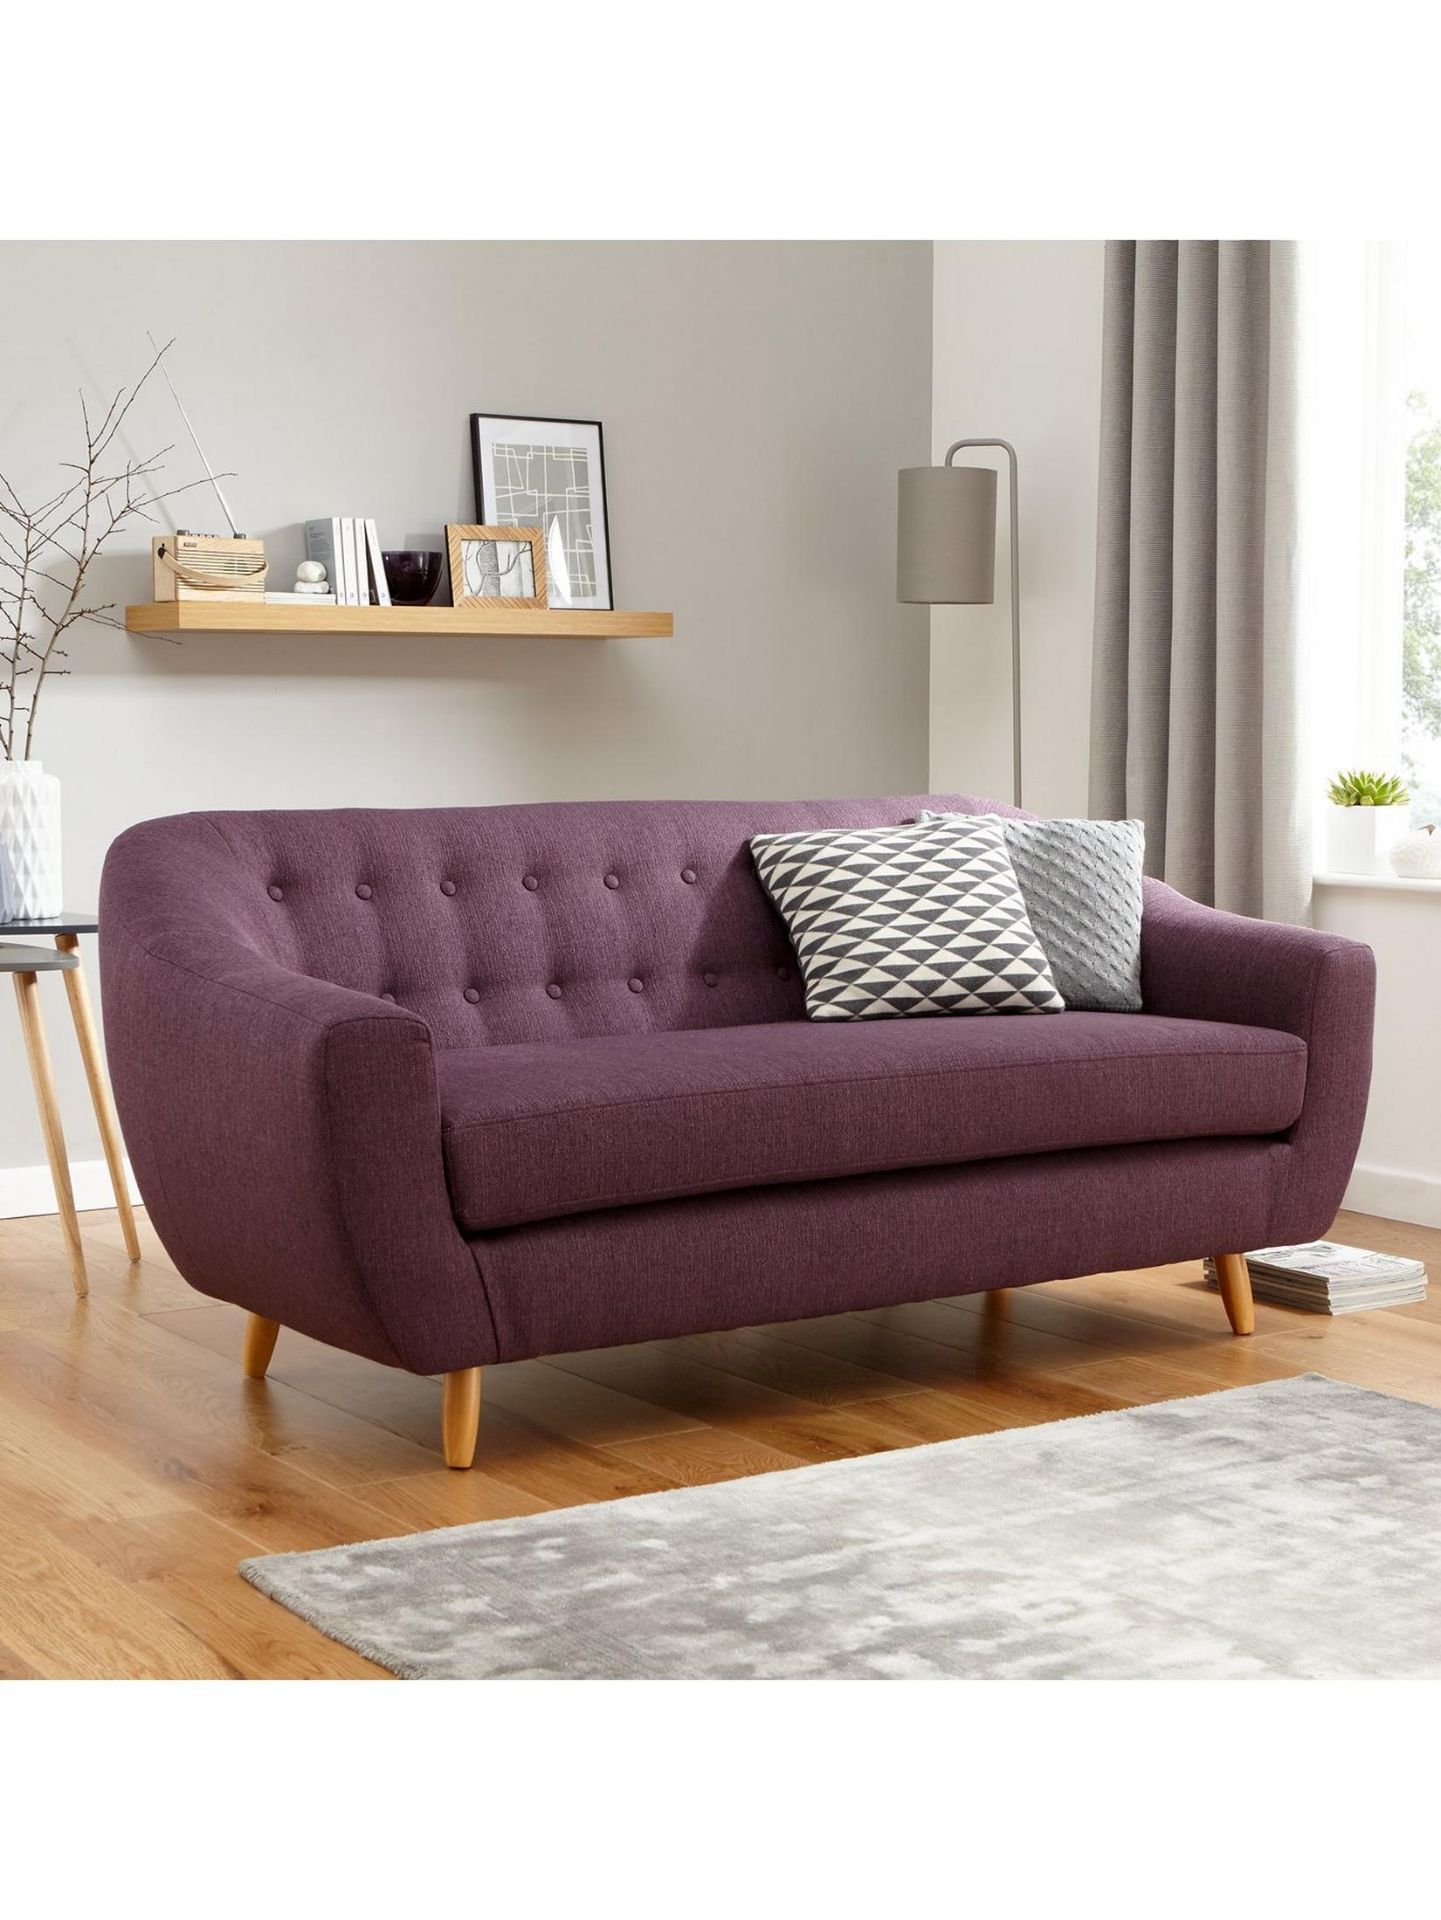 CLAUDIA 3 SEATER SOFA. RPP £479.00. Dimensions: Height 87, Width 188, Depth 82 cm (approx.)